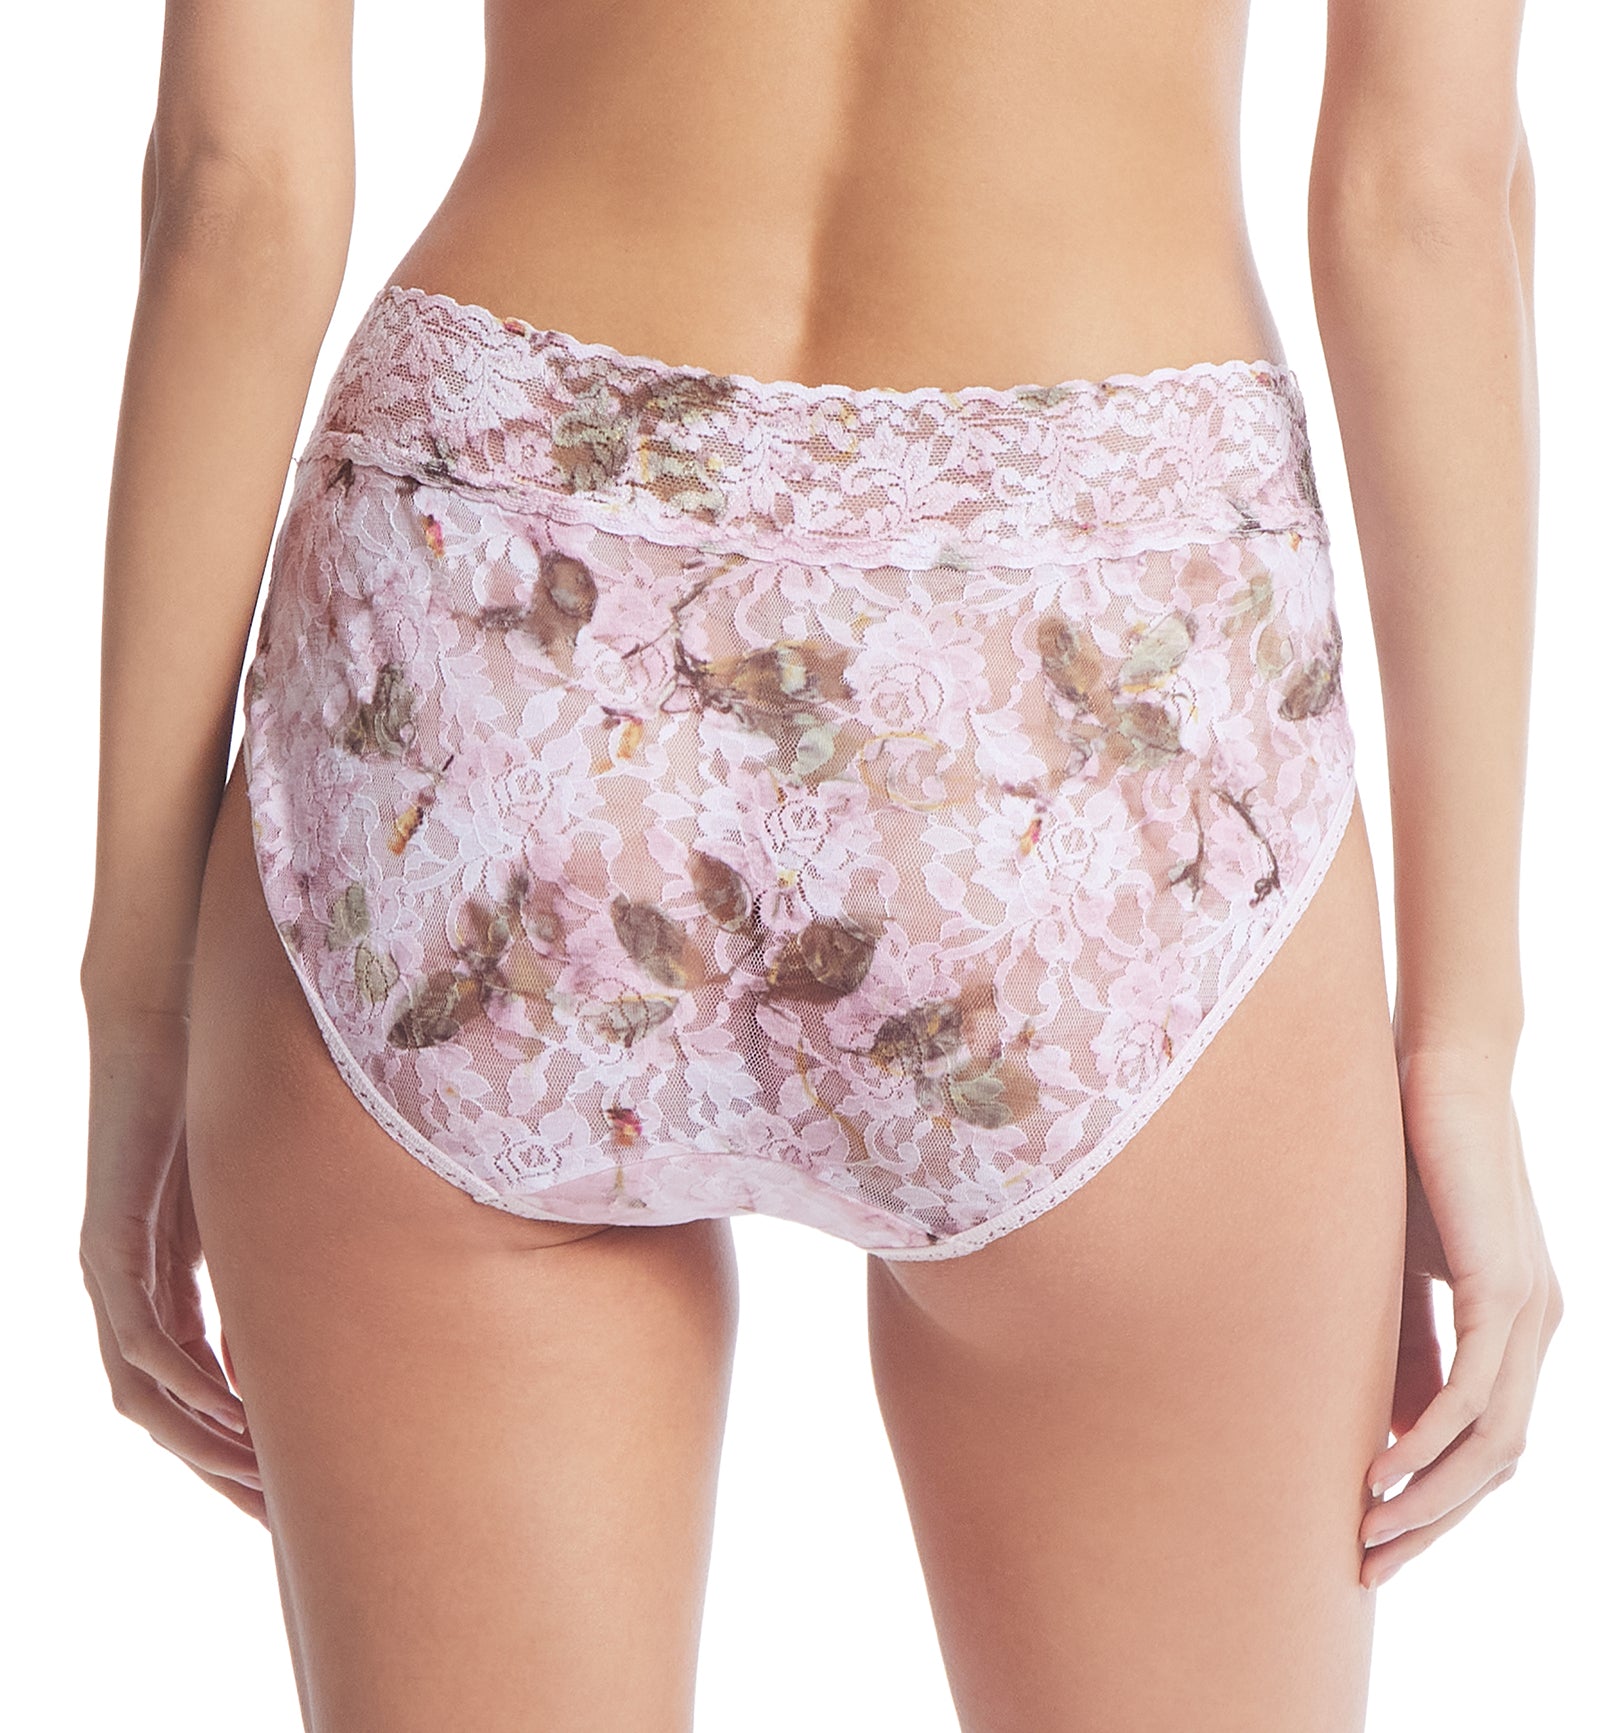 Hanky Panky Signature Lace Printed French Brief (PR461),Small,Antique Lily - Antique Lily,Small